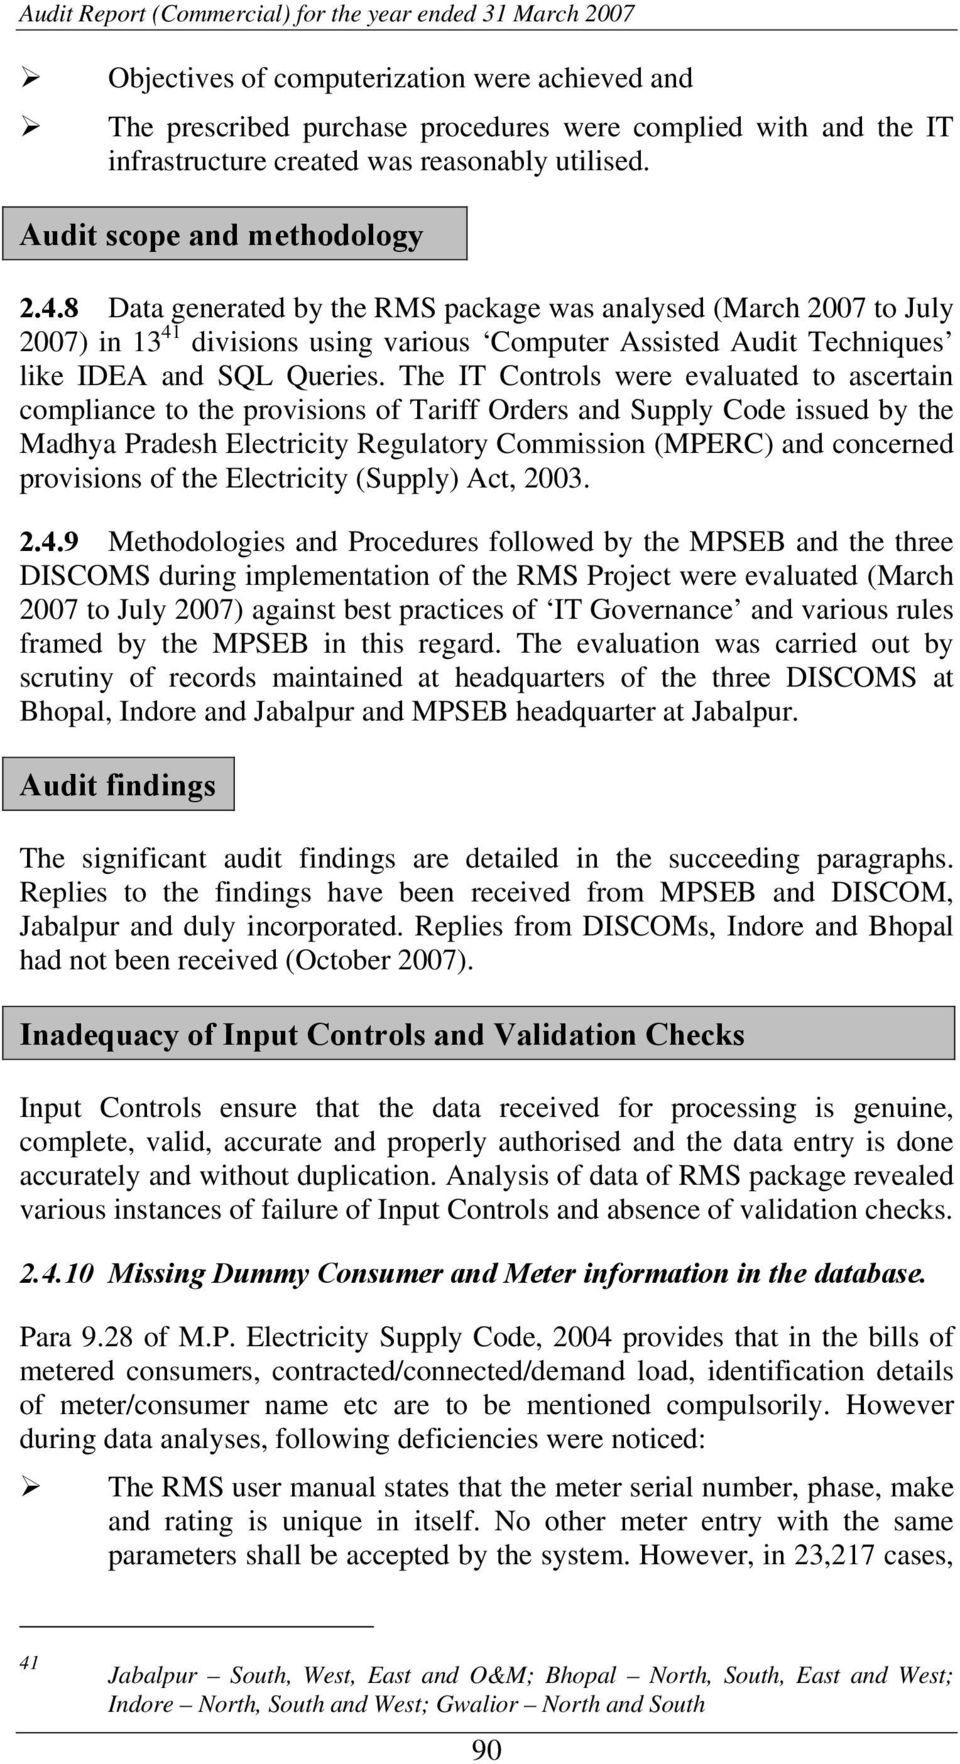 The IT Controls were evaluated to ascertain compliance to the provisions of Tariff Orders and Supply Code issued by the Madhya Pradesh Electricity Regulatory Commission (MPERC) and concerned